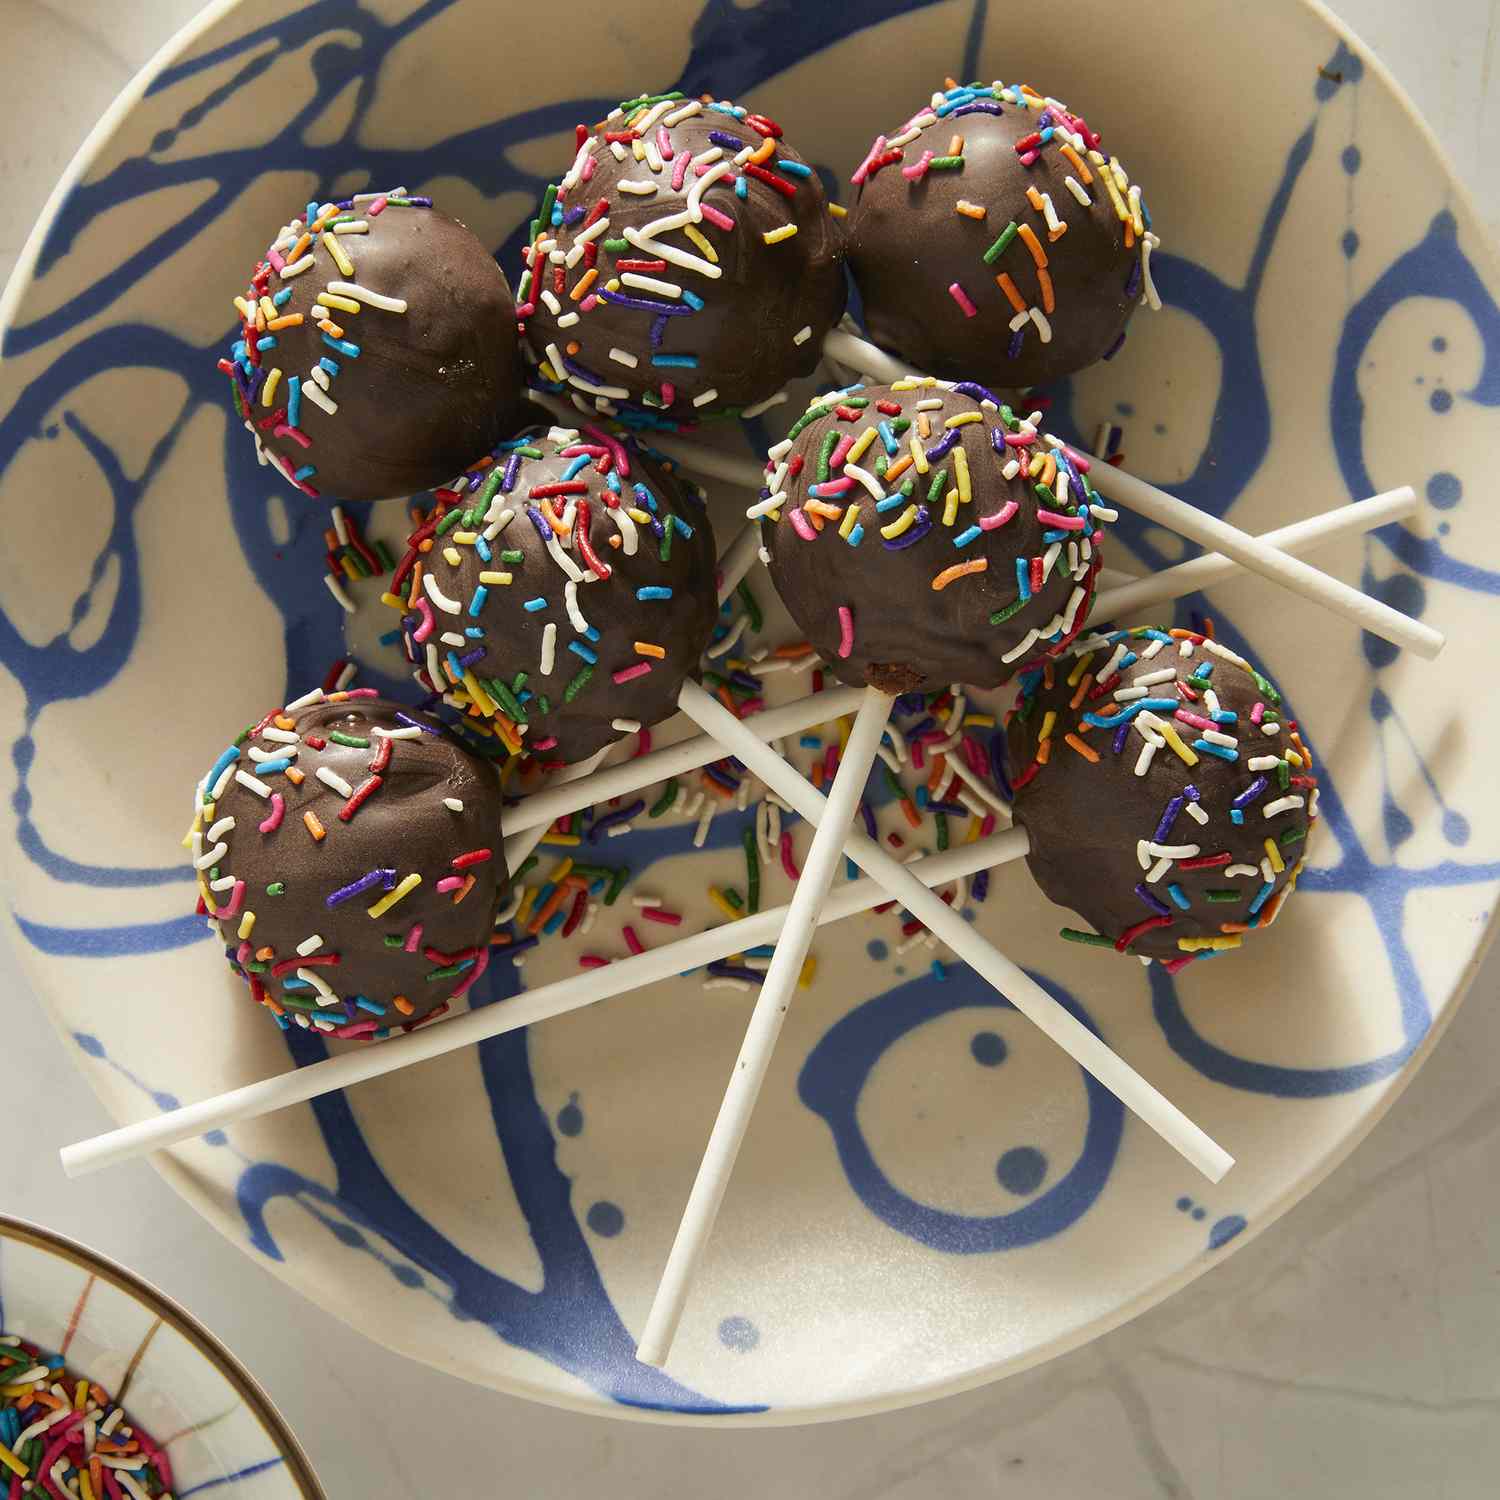 overhead view looking at a plate of chocolate covered cake pops topped with sprinkles